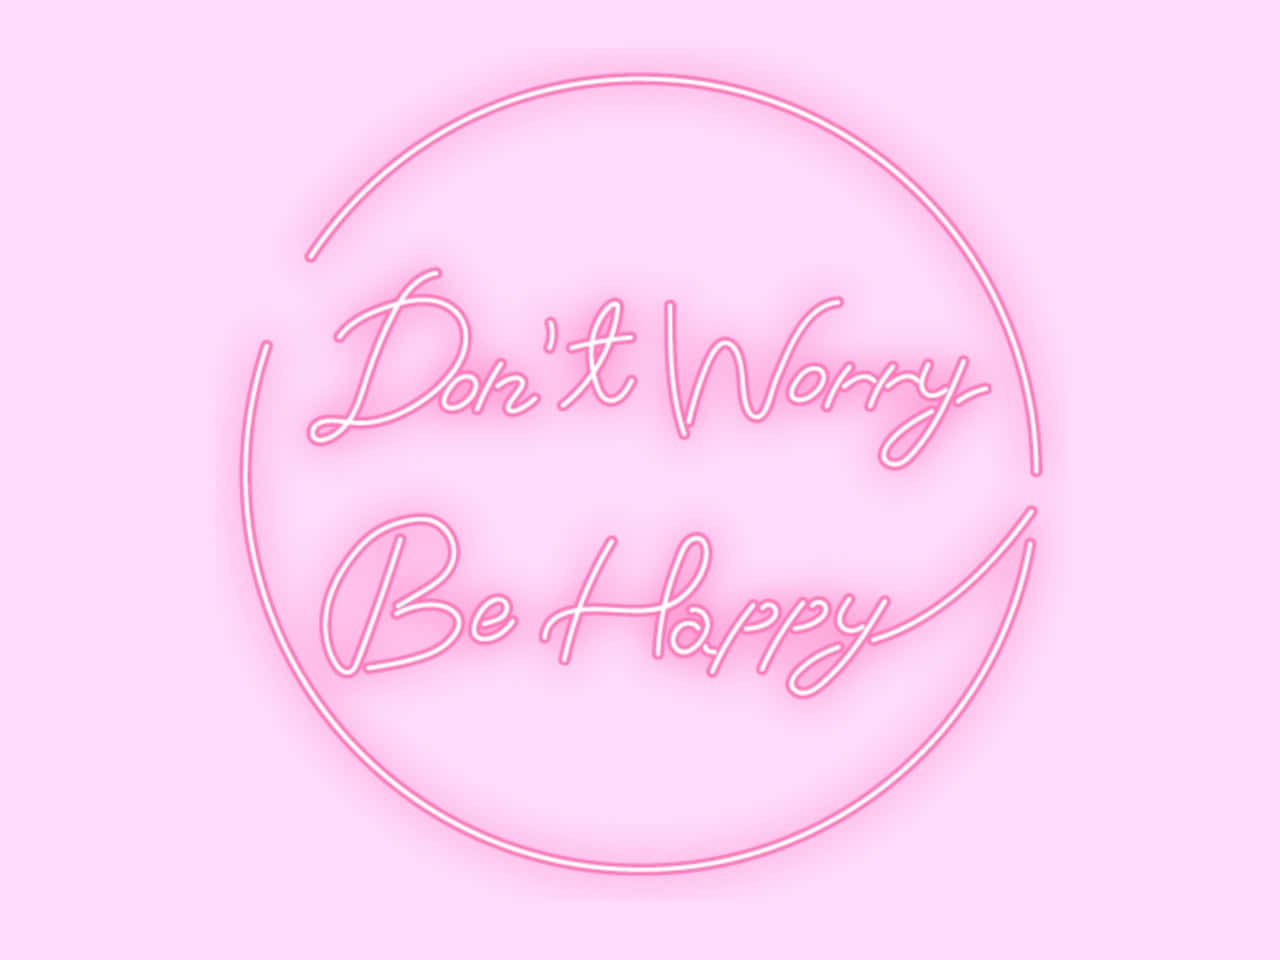 "Dont Worry Be Happy - Happiness is a Choice!" Wallpaper